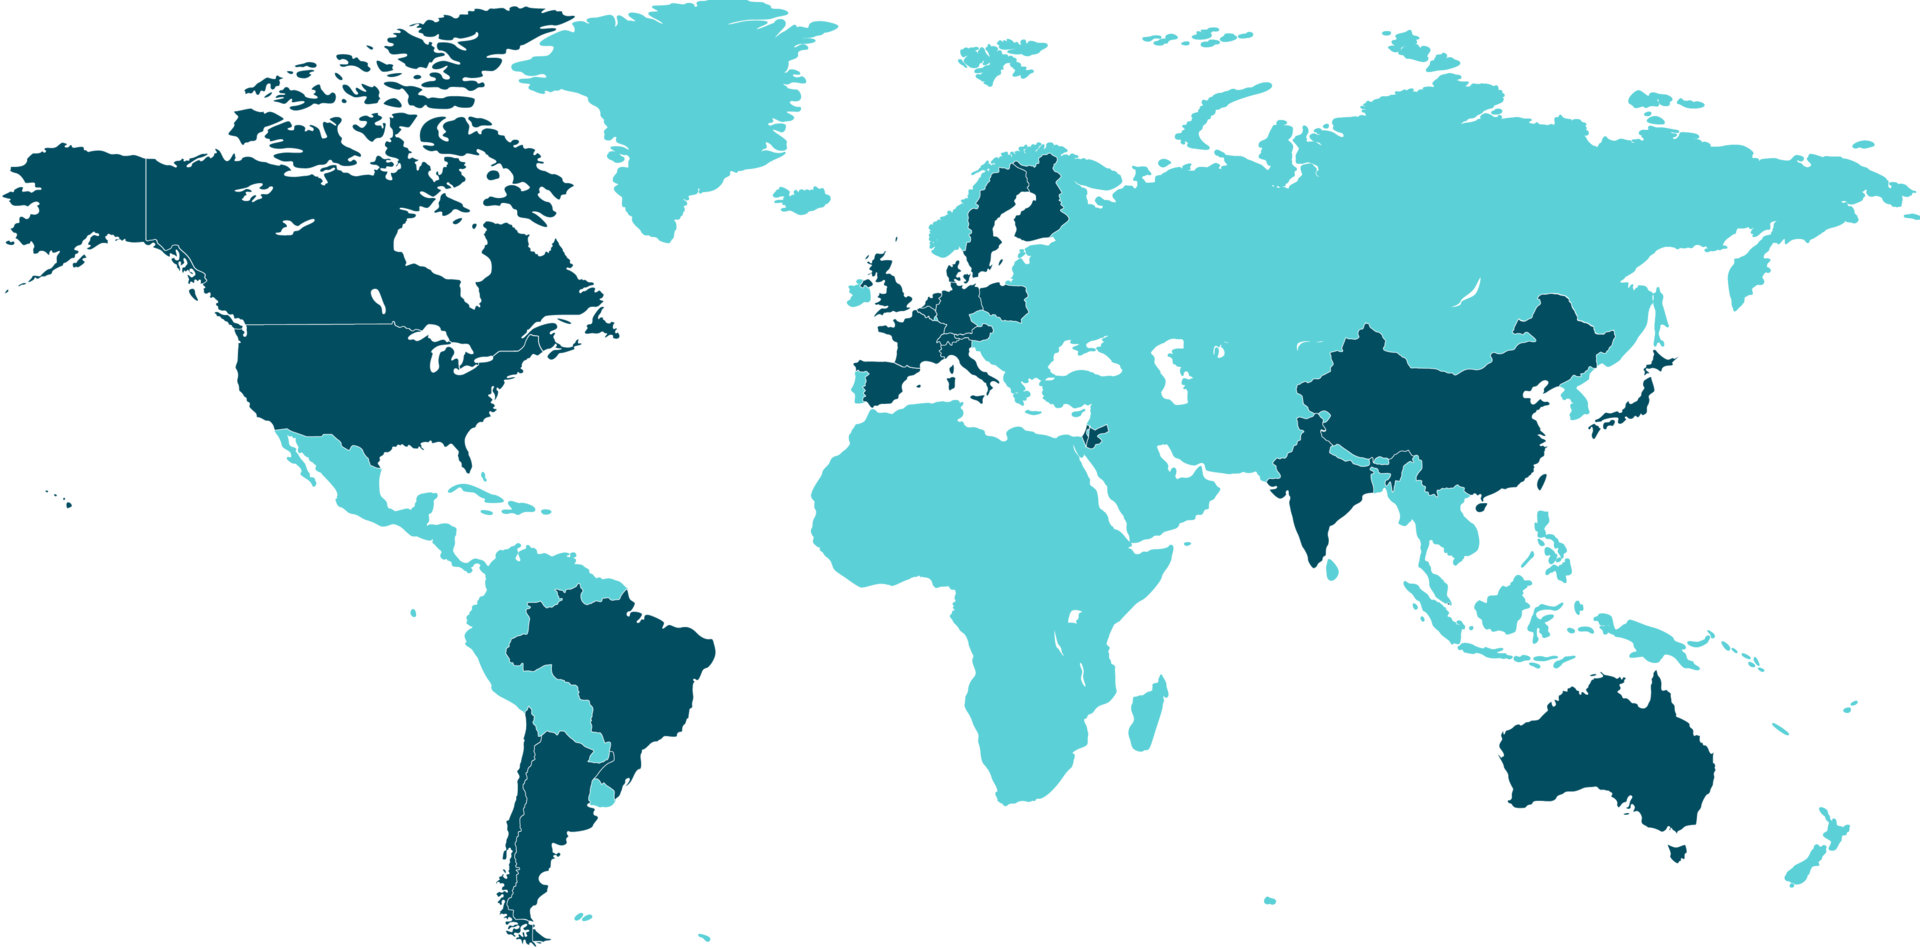 World map showing the countries where RITMO has partners.